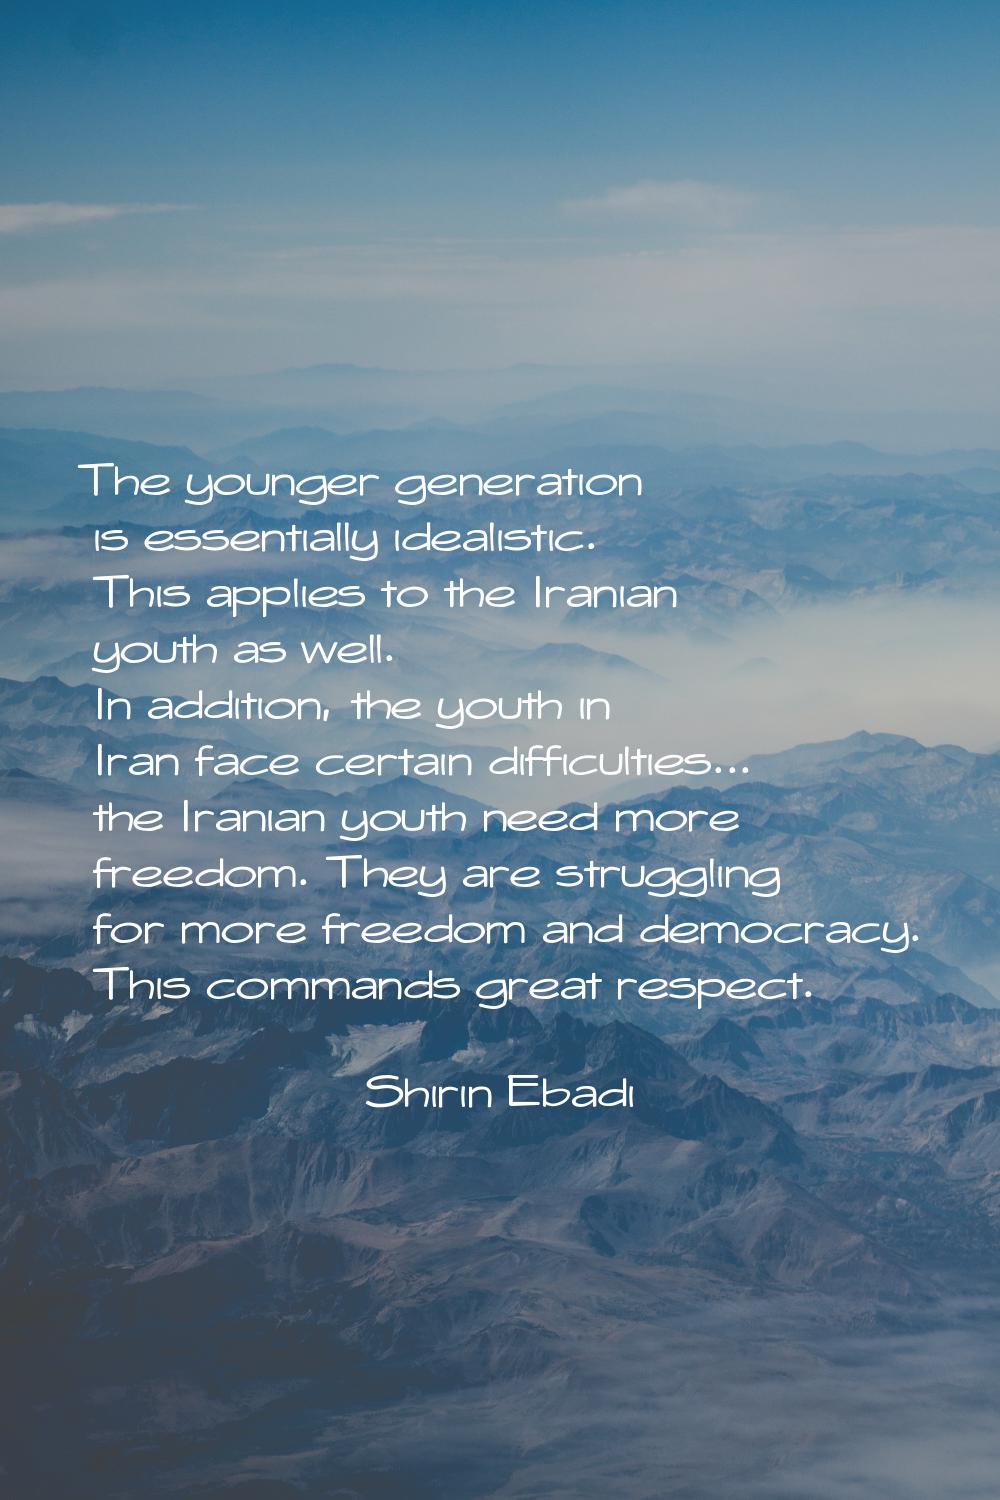 The younger generation is essentially idealistic. This applies to the Iranian youth as well. In add